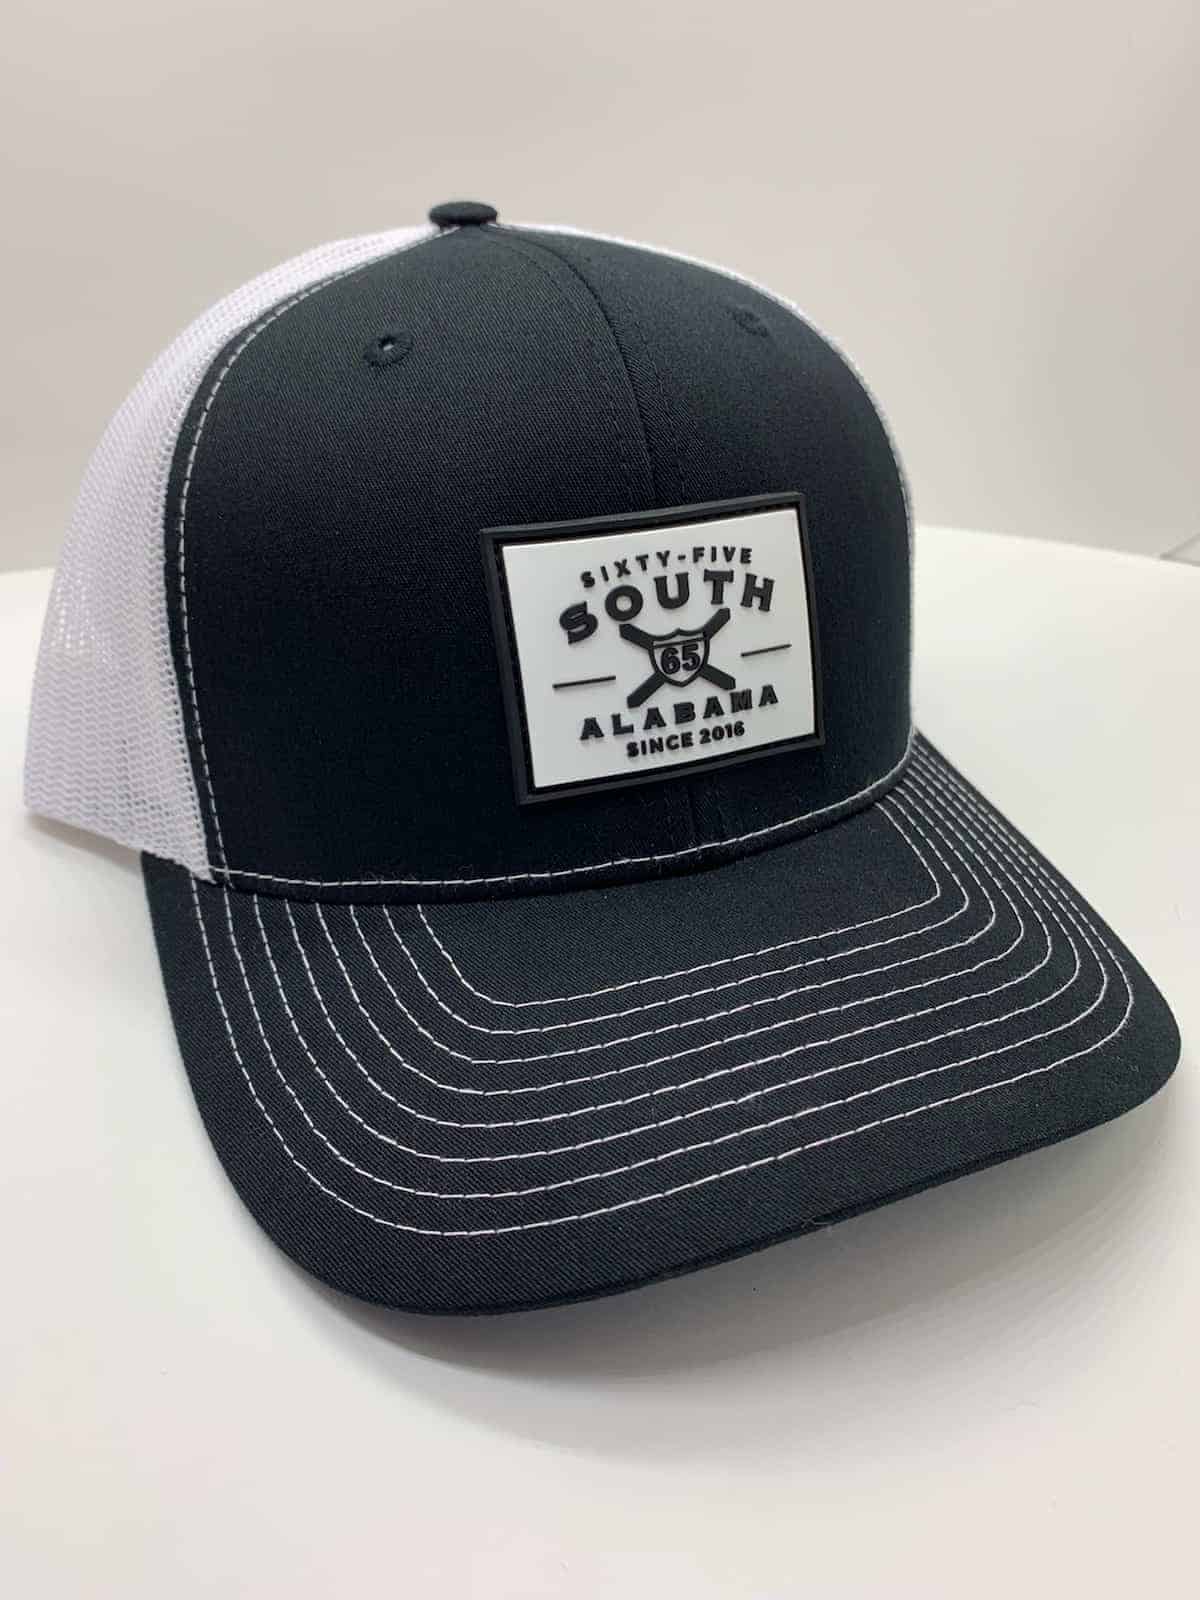 Rubber Patch Black Hat (Youth) - 65 South